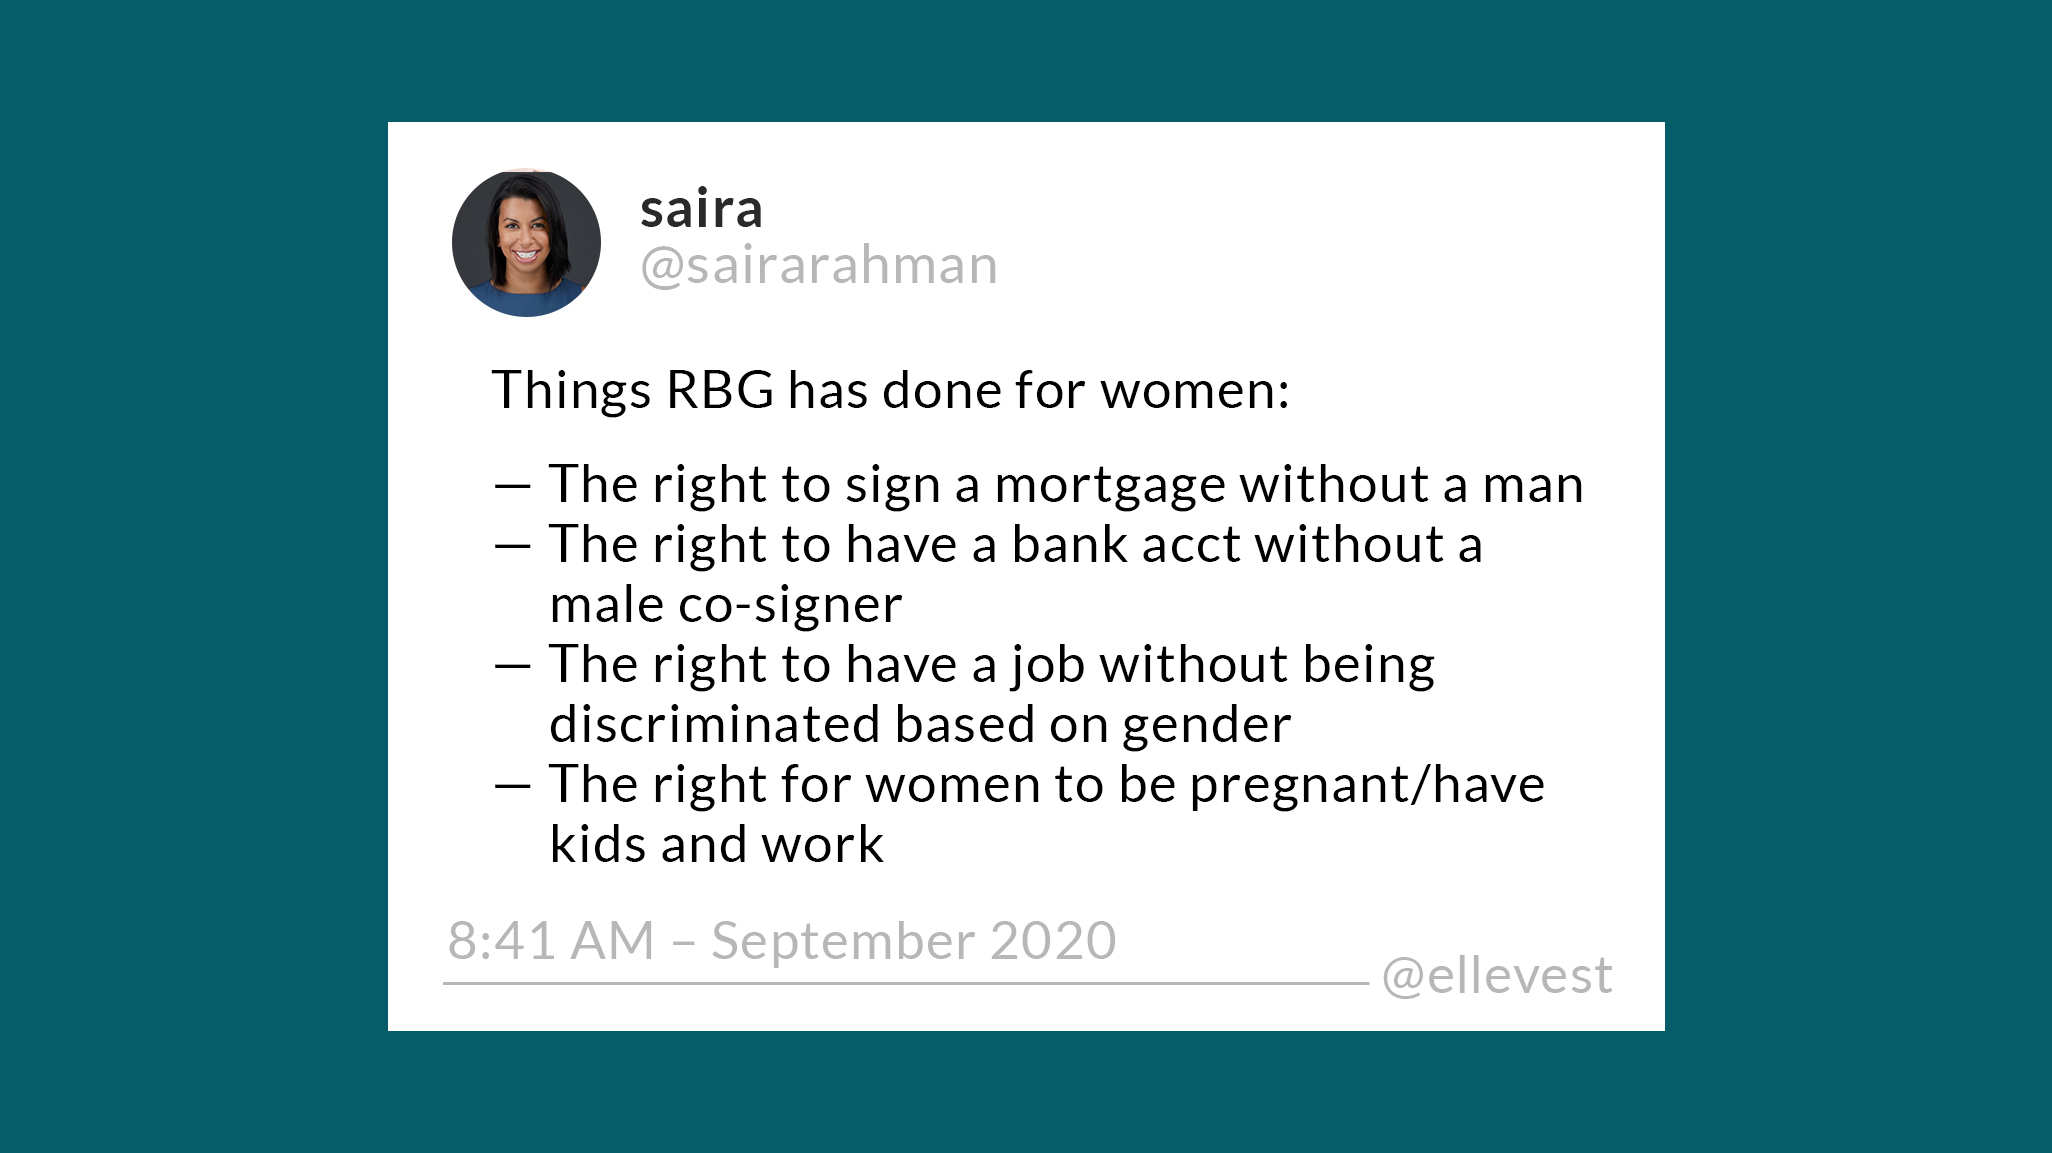 A tweet about things Ruth Bader Ginsburg has done for women.